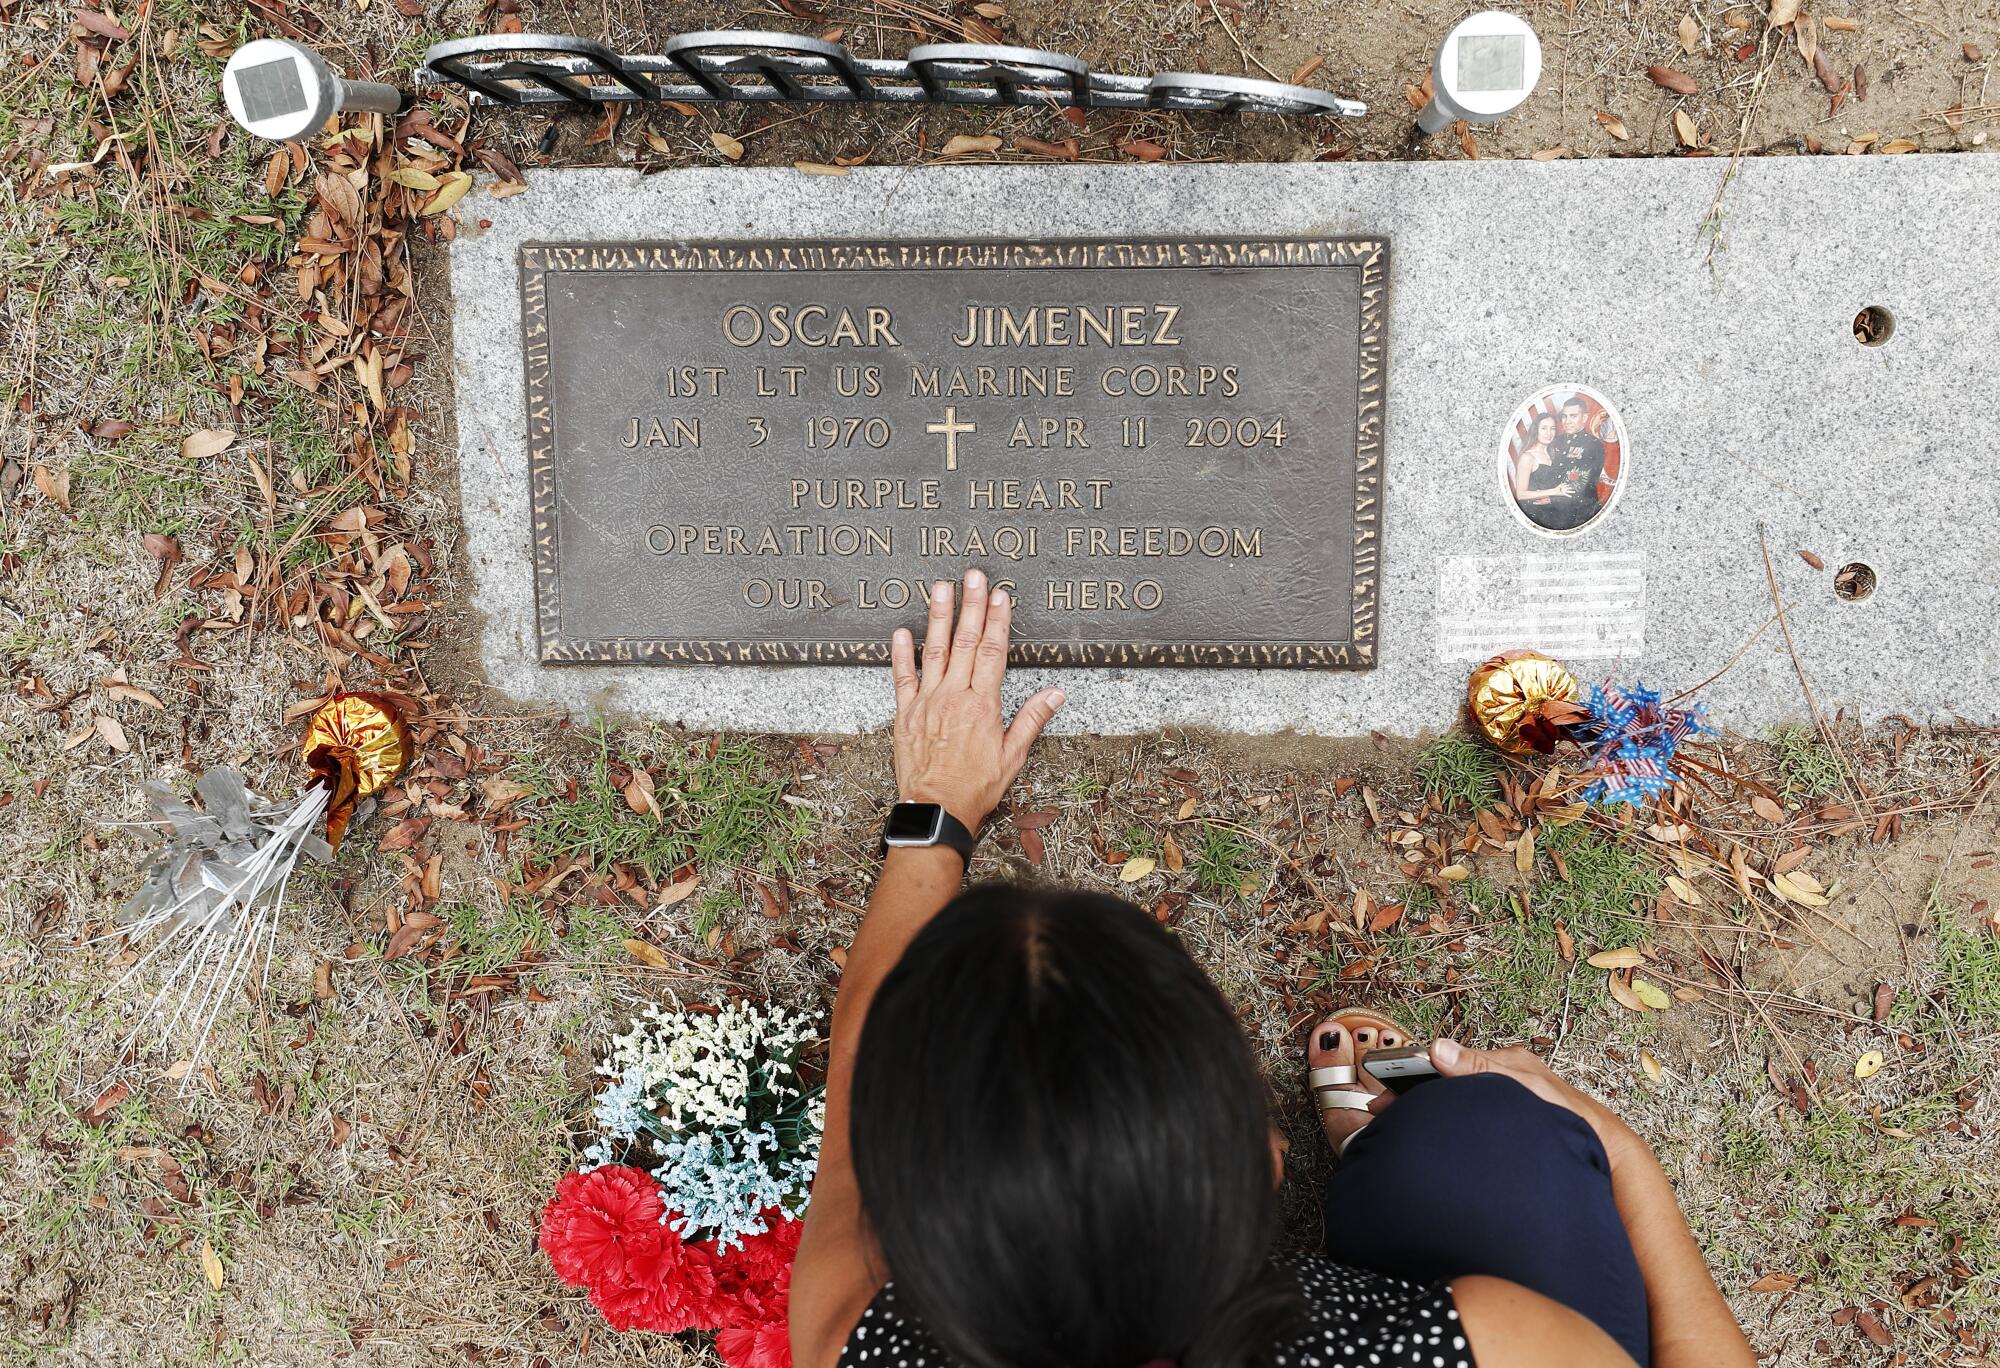 Sonia Jimenez visits the grave of her brother Oscar Jimenez at Greenwood Memorial Park in San Diego.